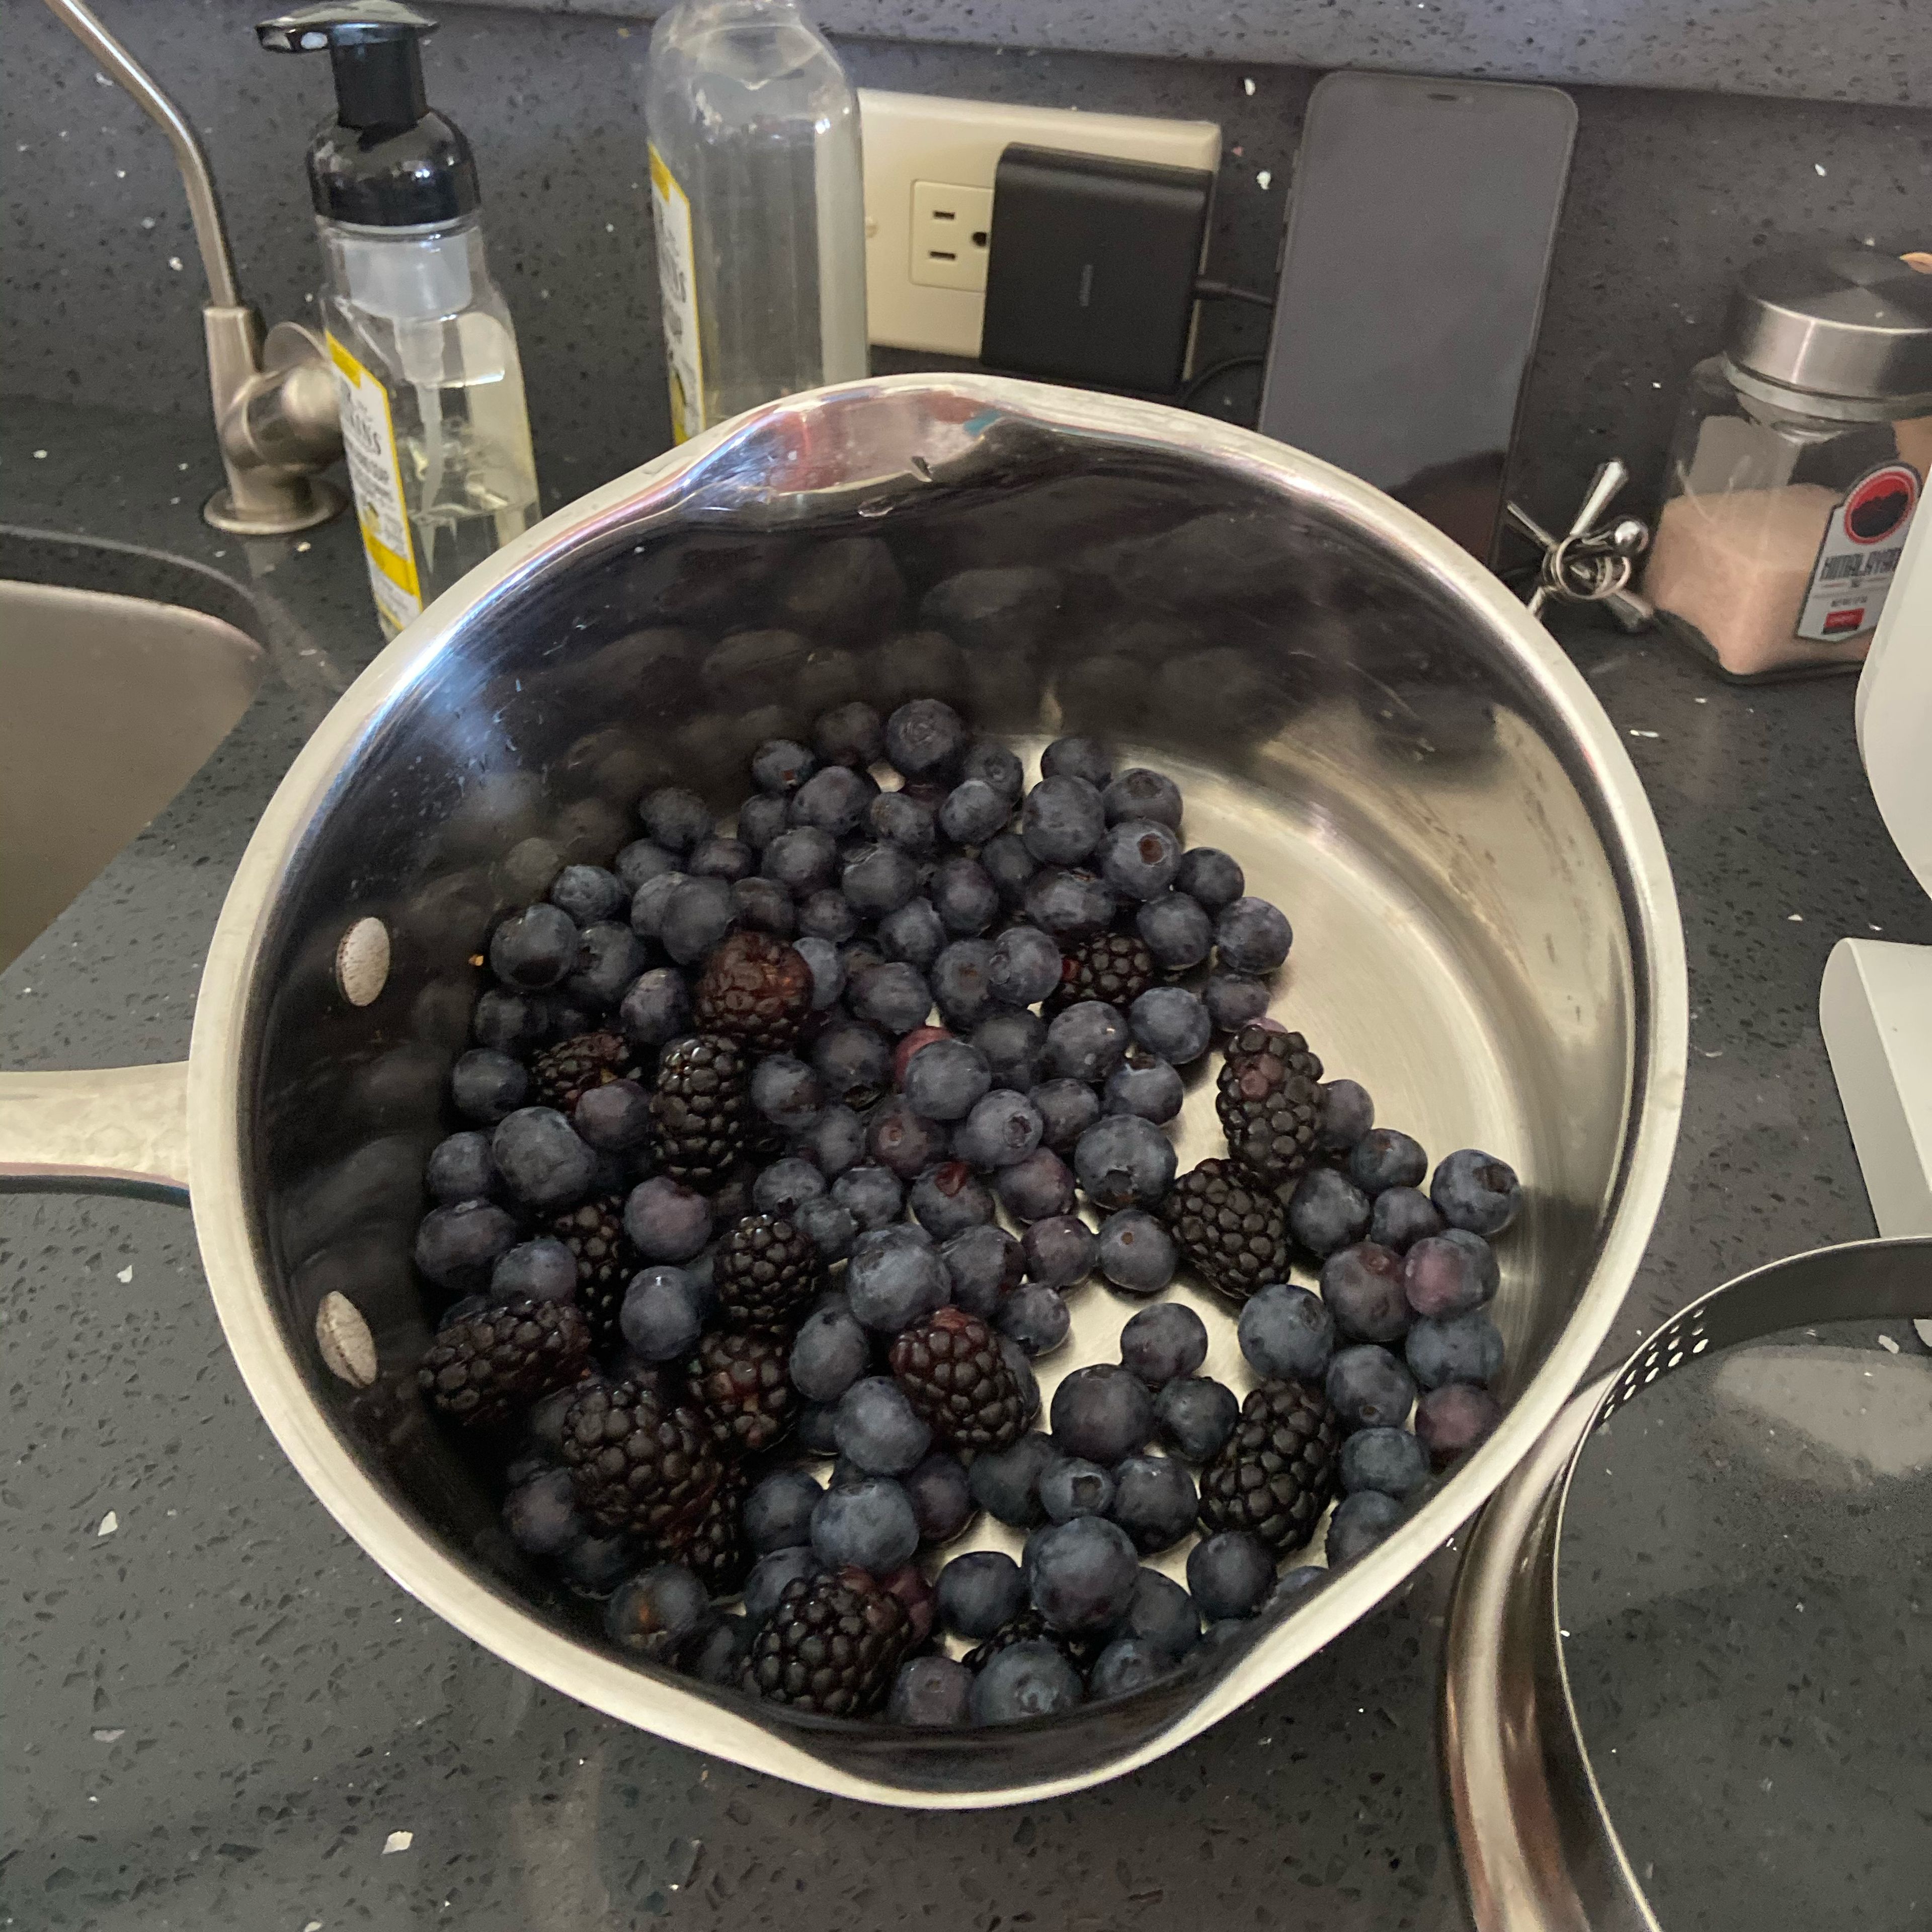 Soak the blueberries and raspberries in cold water